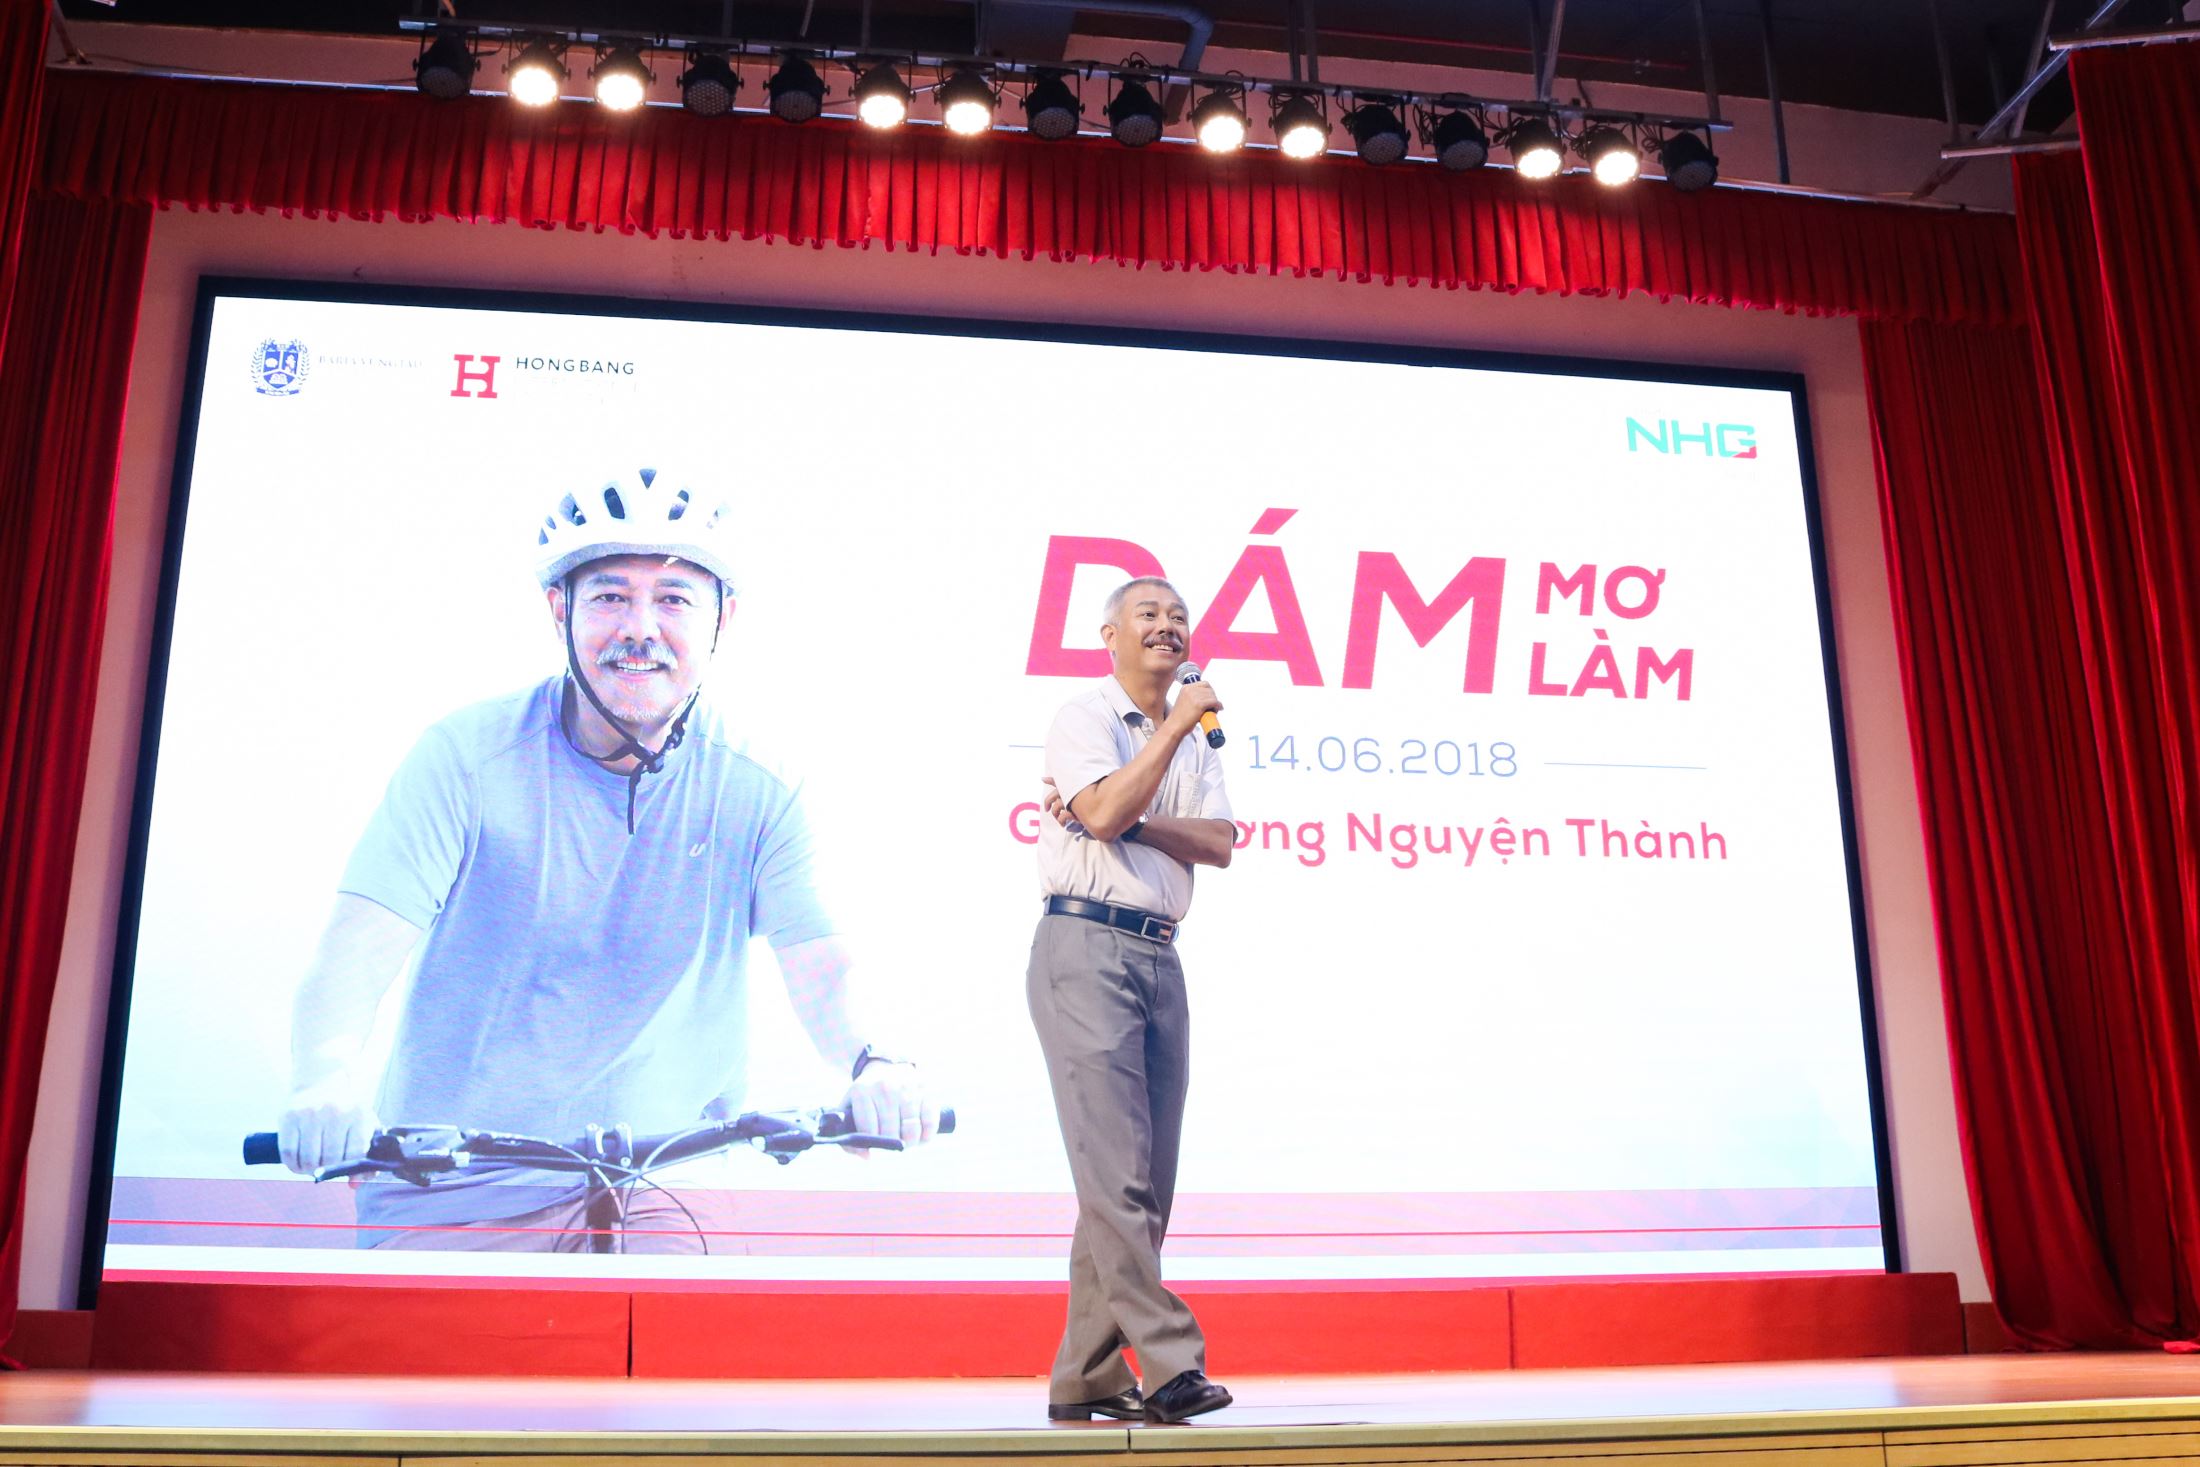 Prof. Truong Nguyen Thanh shared his method to make dream come true with young students.